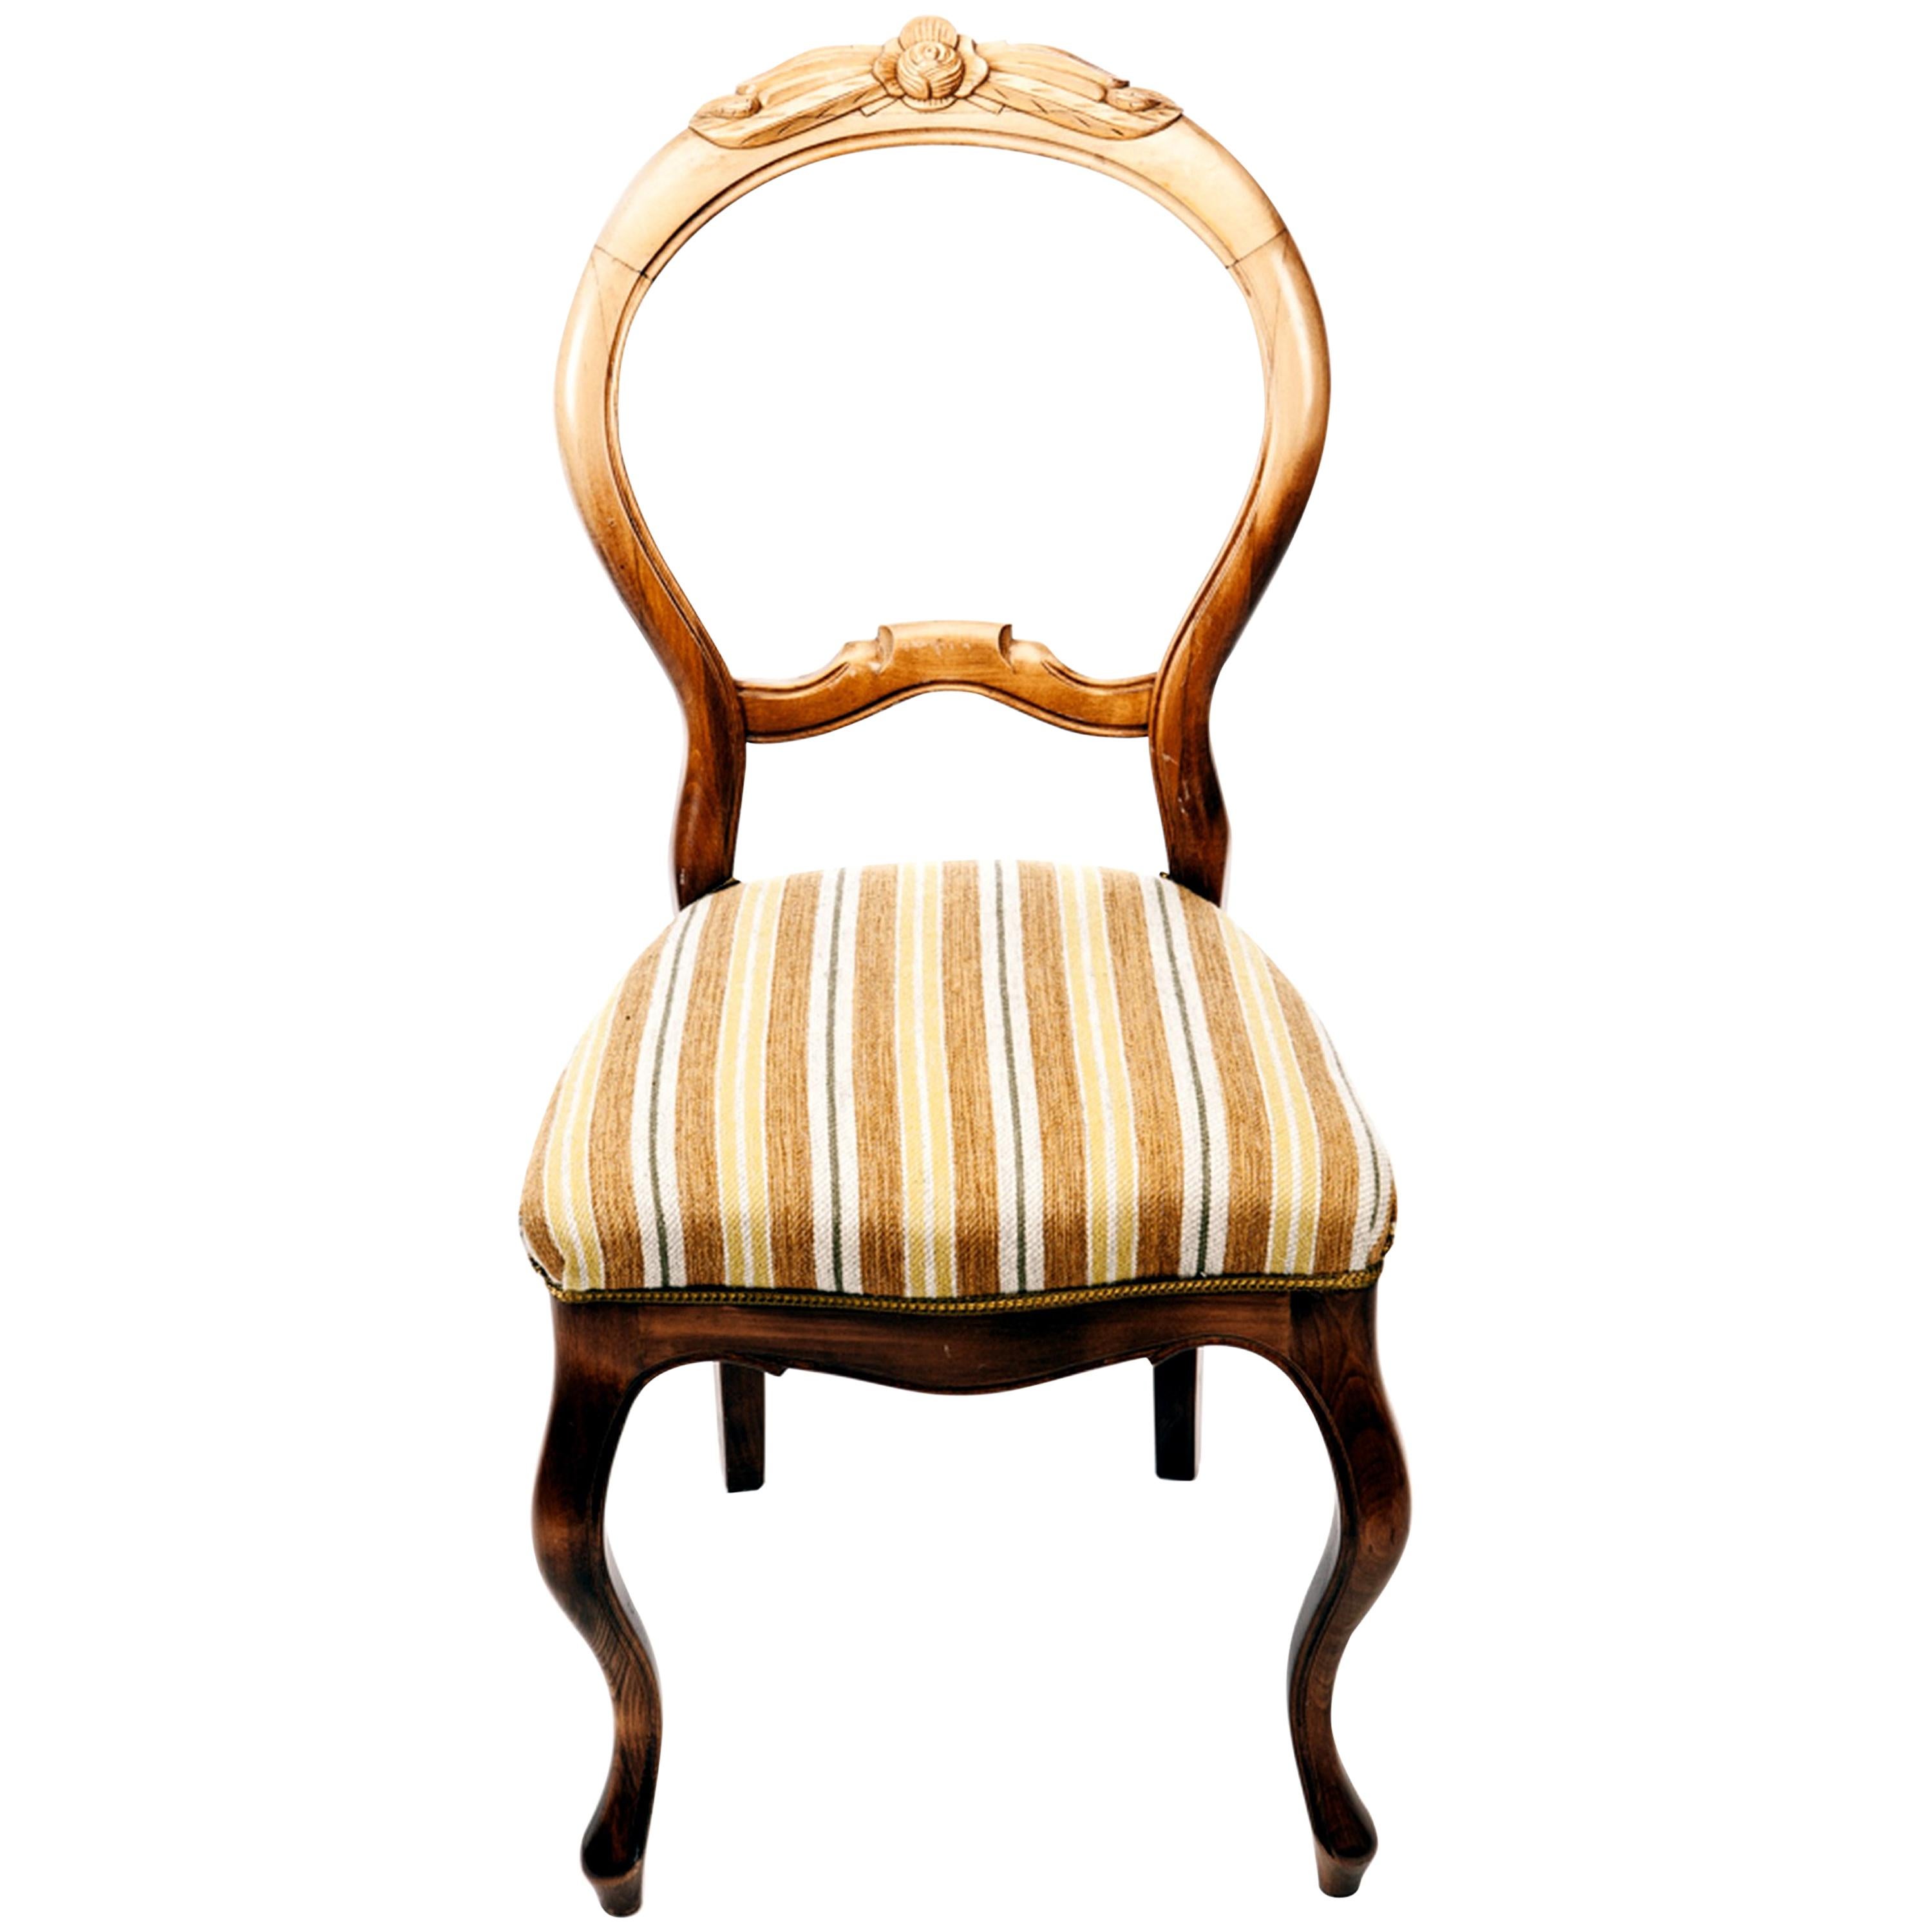 Swedish Rococo Chairs in Carved Birch, Early 1900s For Sale